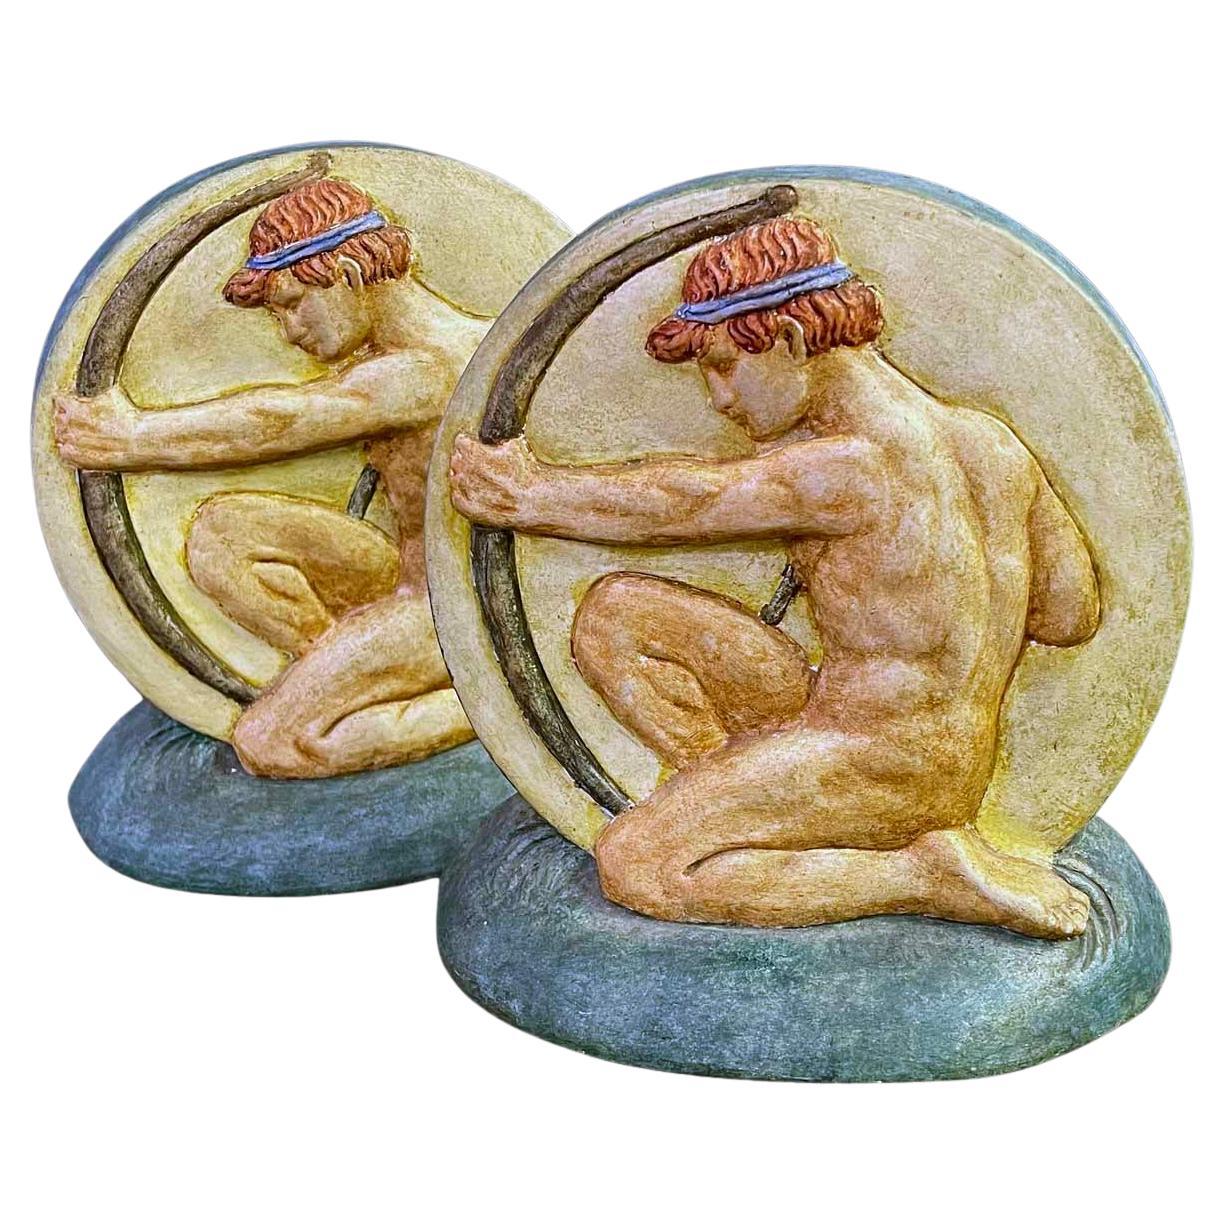 "Nude Male Archer Bookends", Rare Pair of Ceramic, Arts and Crafts Sculptures